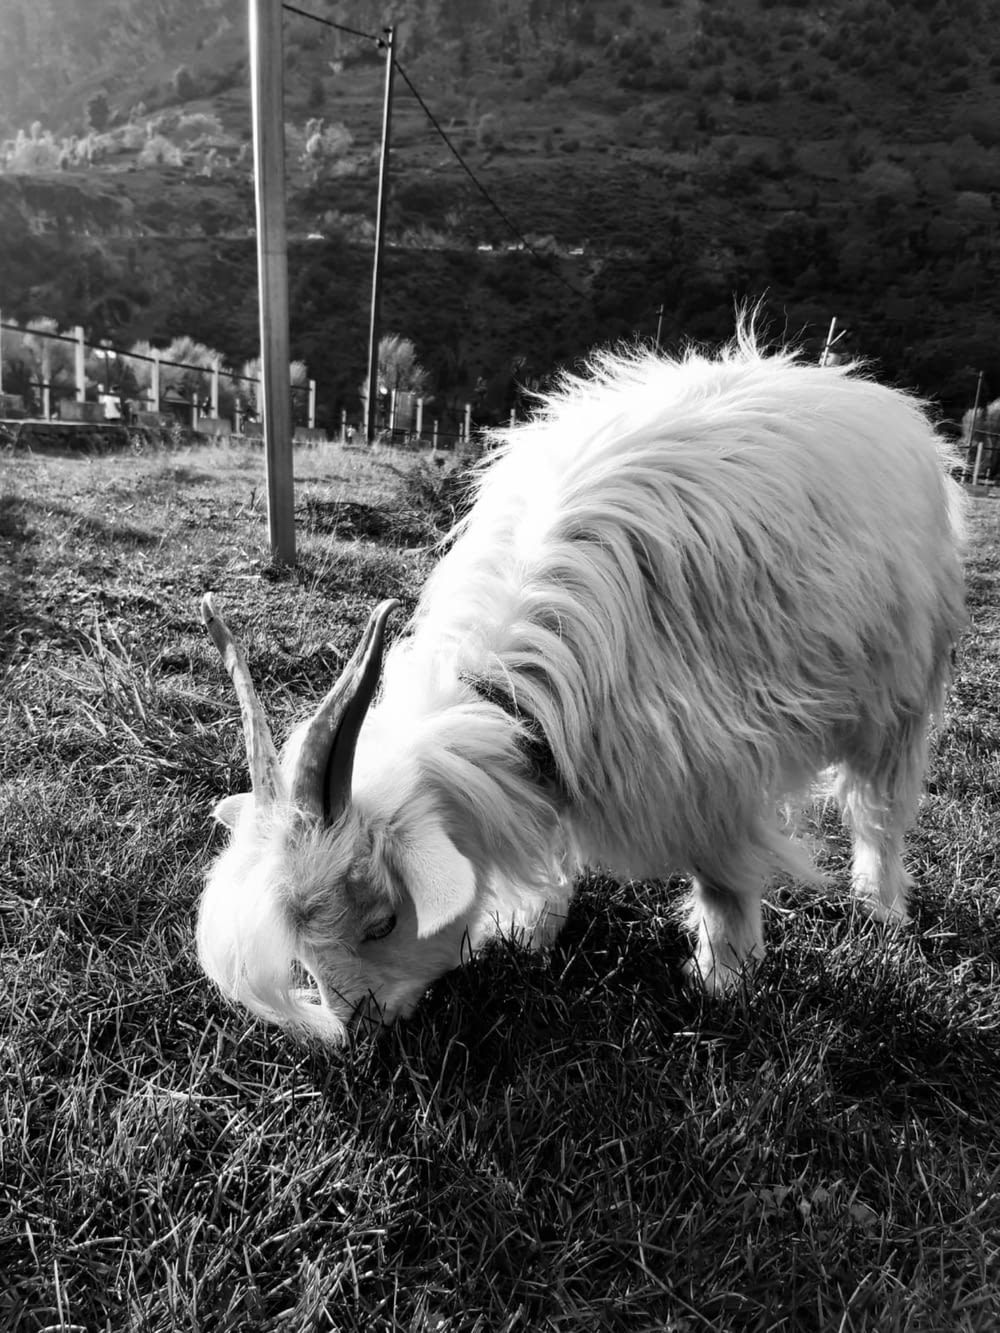 a goat grazing on grass in a fenced in area